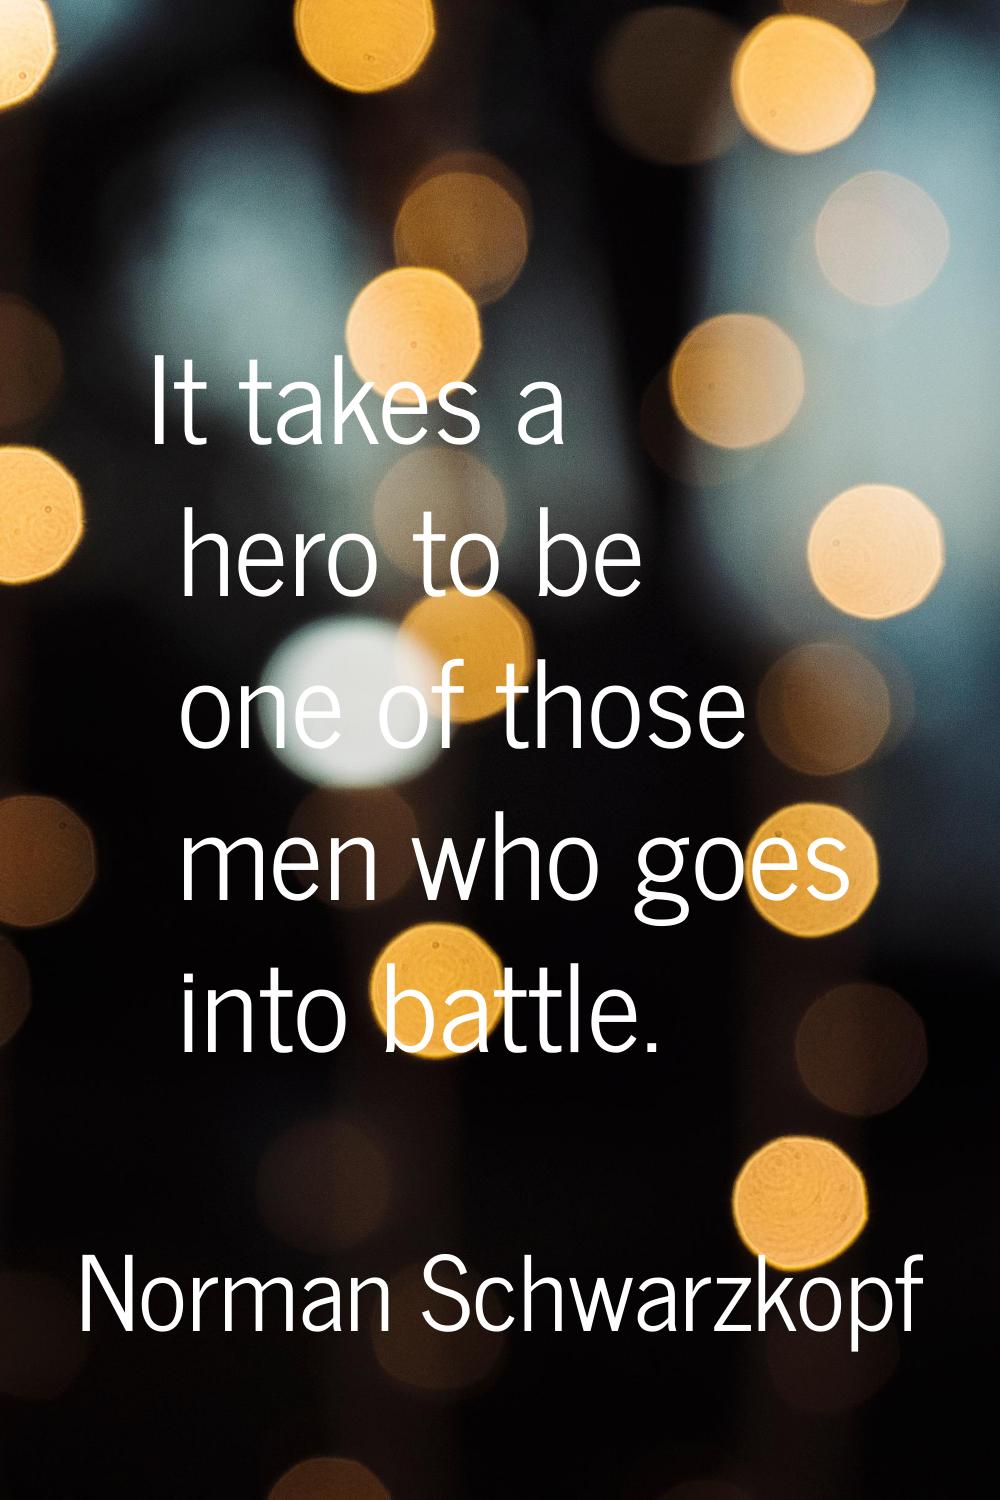 It takes a hero to be one of those men who goes into battle.